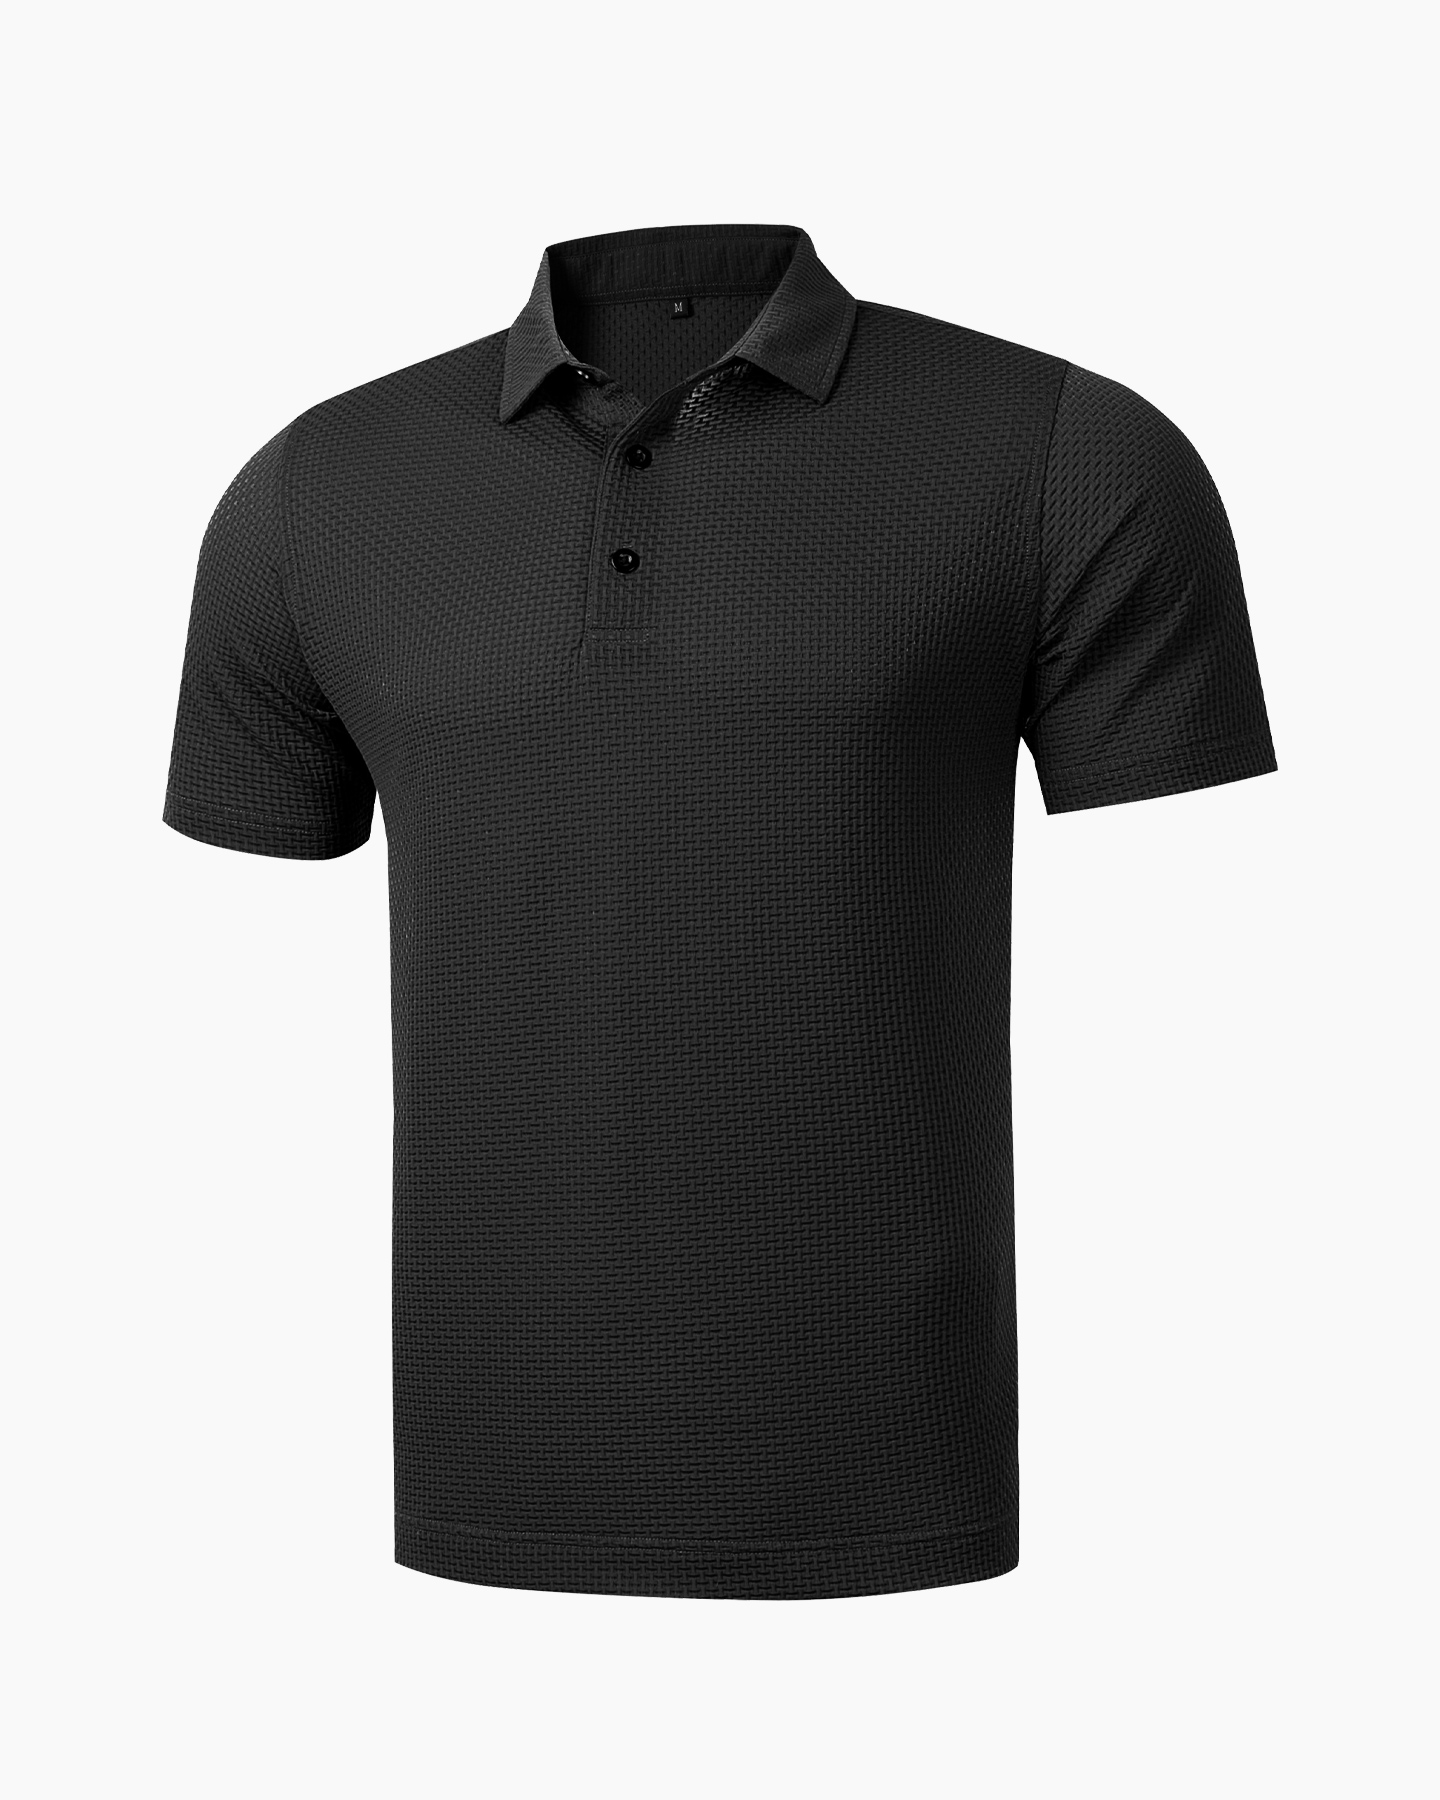 Knit Polo Shirt in black by Deolax